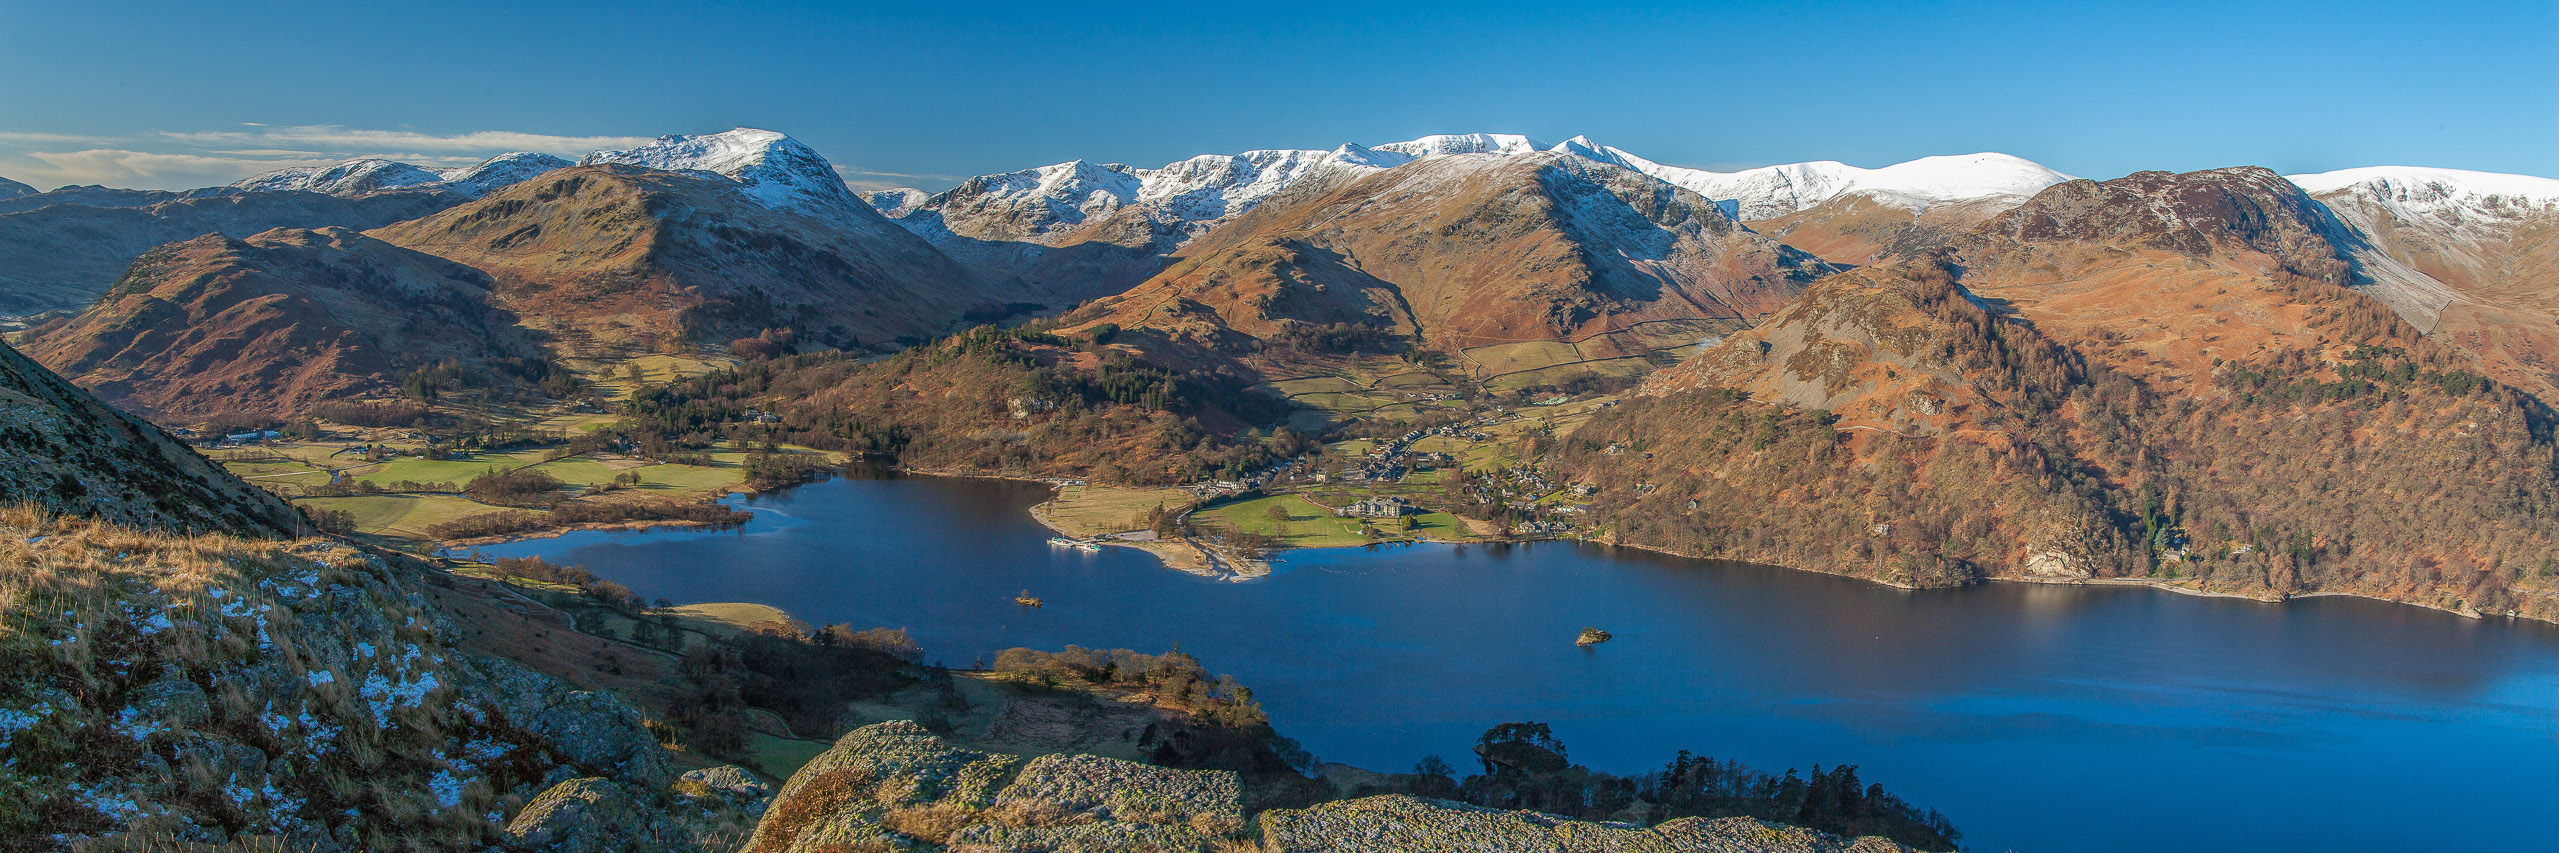 Helvellyn and Ullswater - A Fine Art Print by Mountain Images